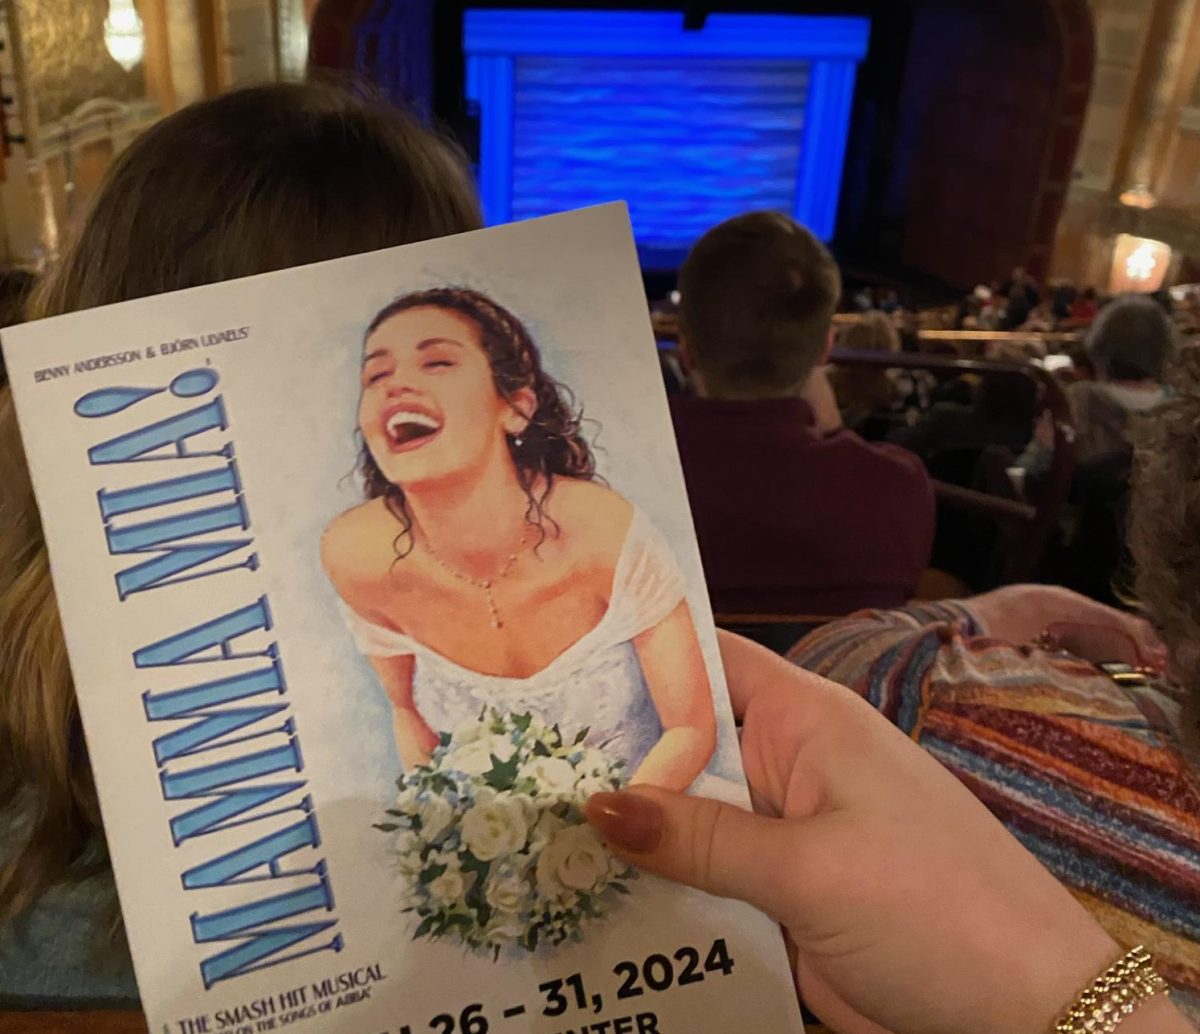 Mamma+Mia%21+toured+in+Pittsburgh+from+March+26+to+31+at+the+Benedum+Theater.